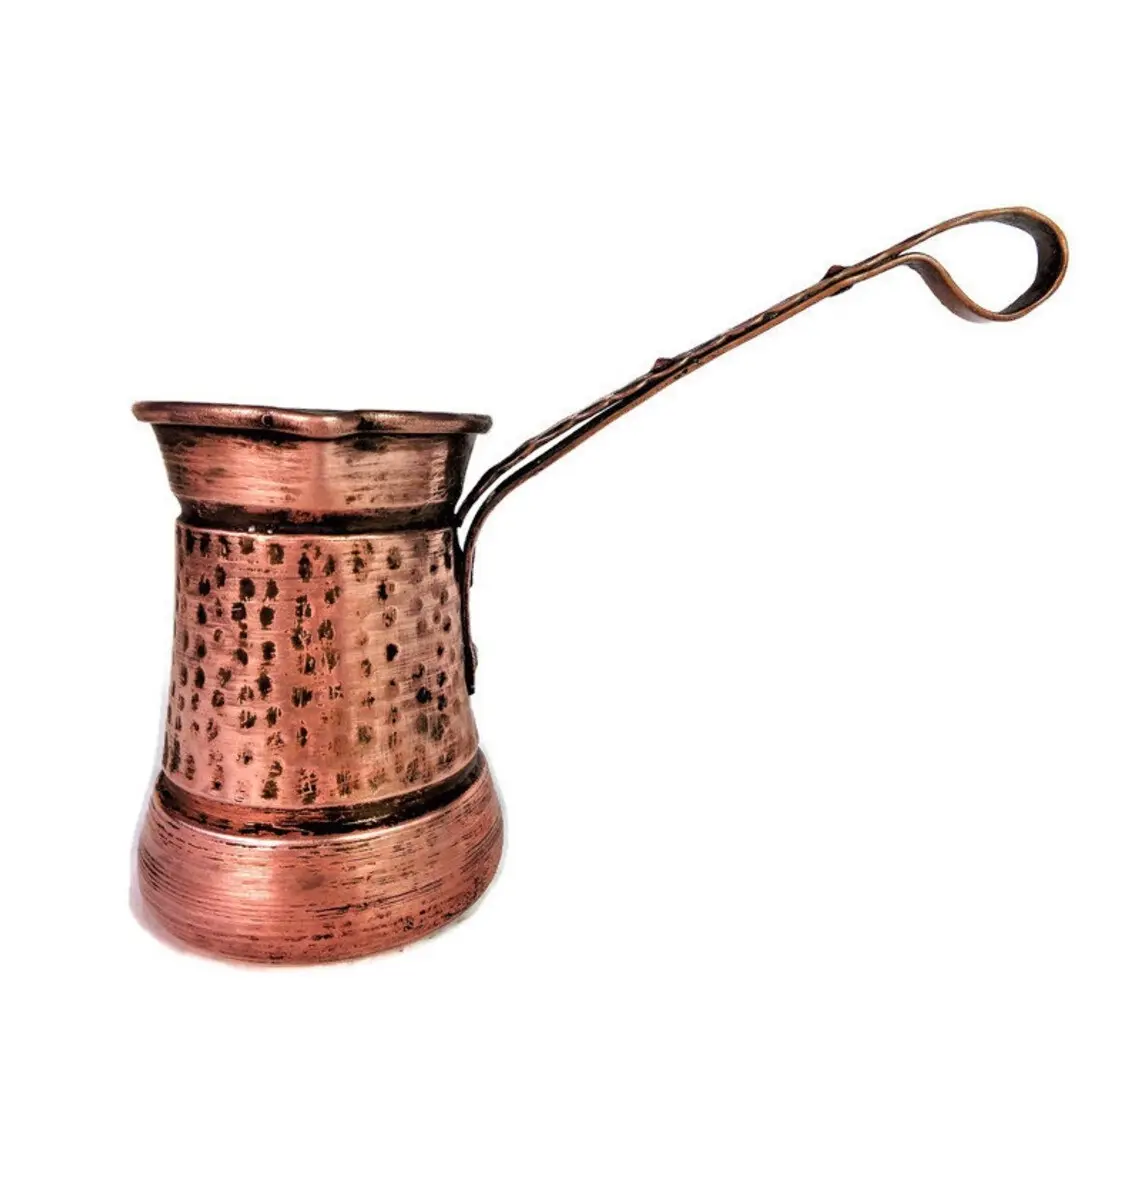 Attractive antique copper Turkish coffee pot tableware coffee cup home kitchen restaurant hotel party table decor made in India